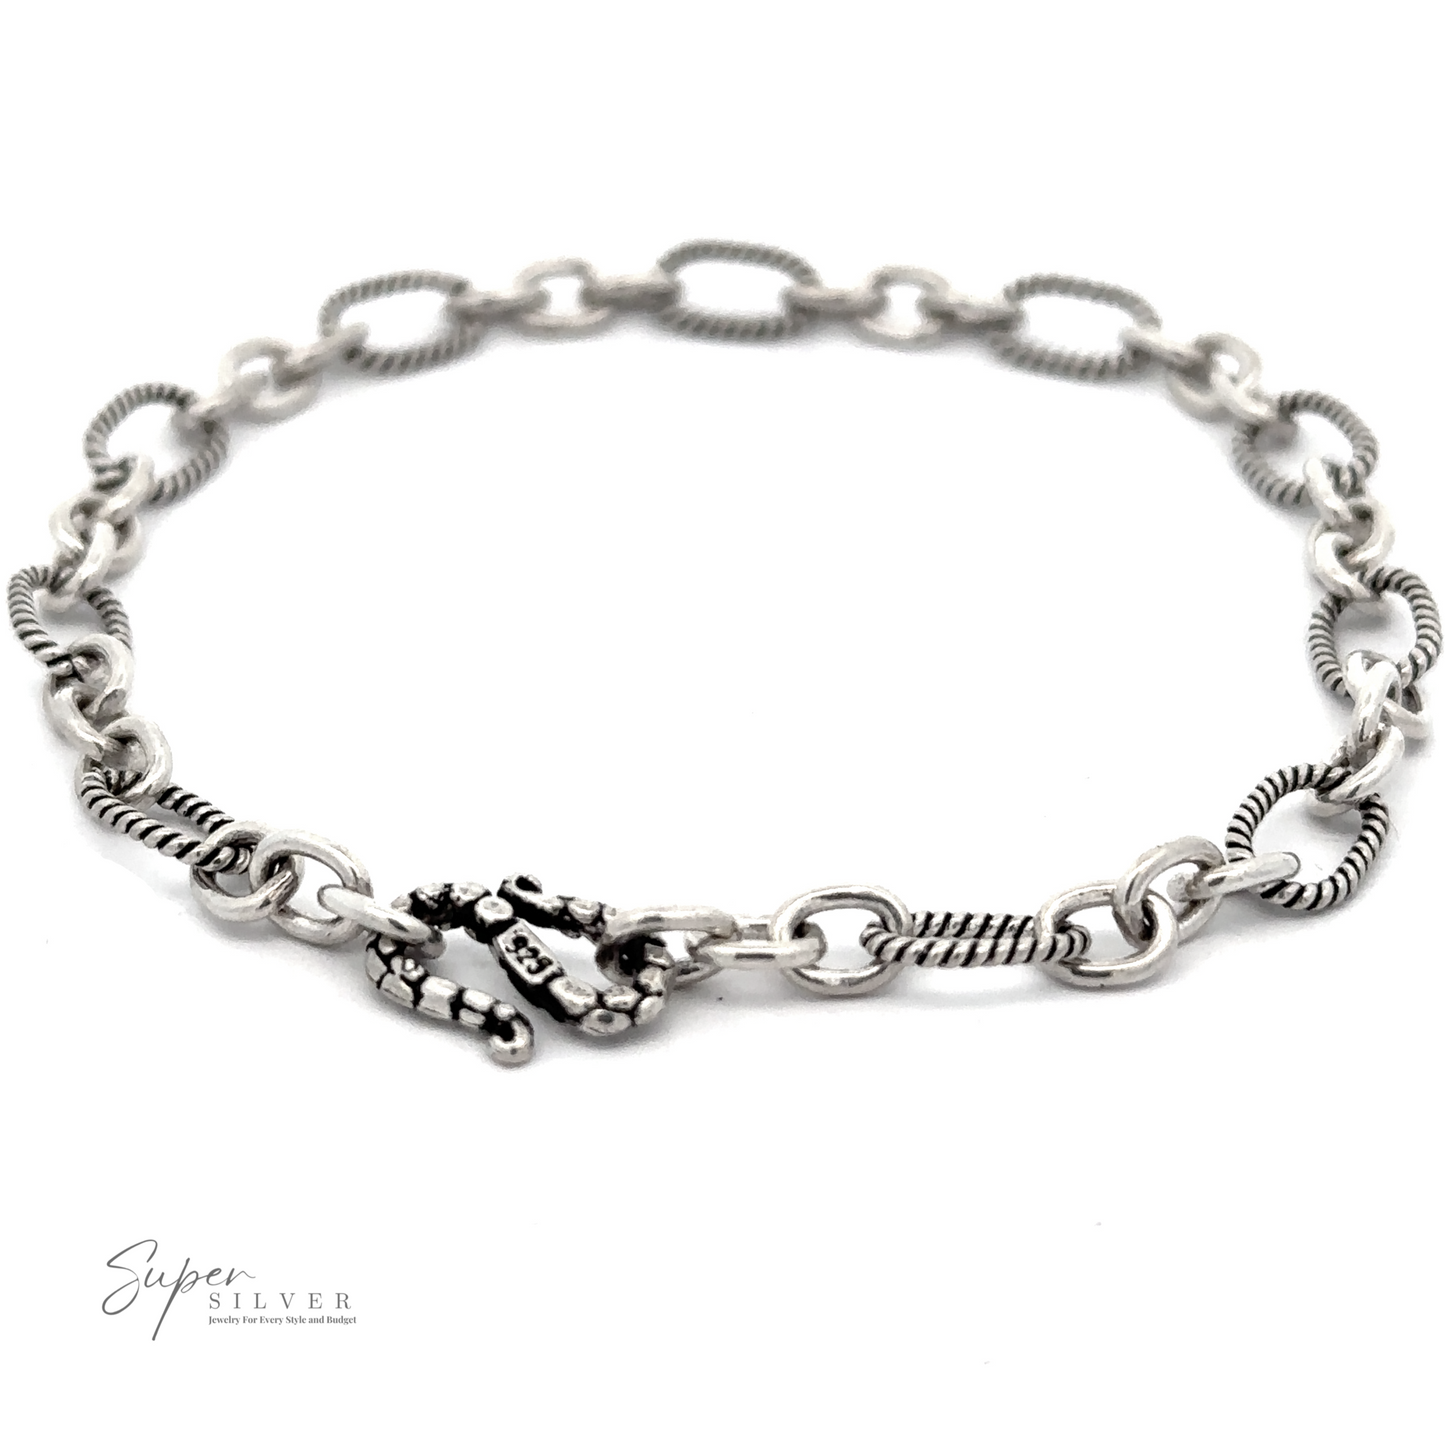 A Lasso and Rolo Bracelet featuring a mix of textured and smooth chain links with a decorative clasp, inspired by Balinese artistry.